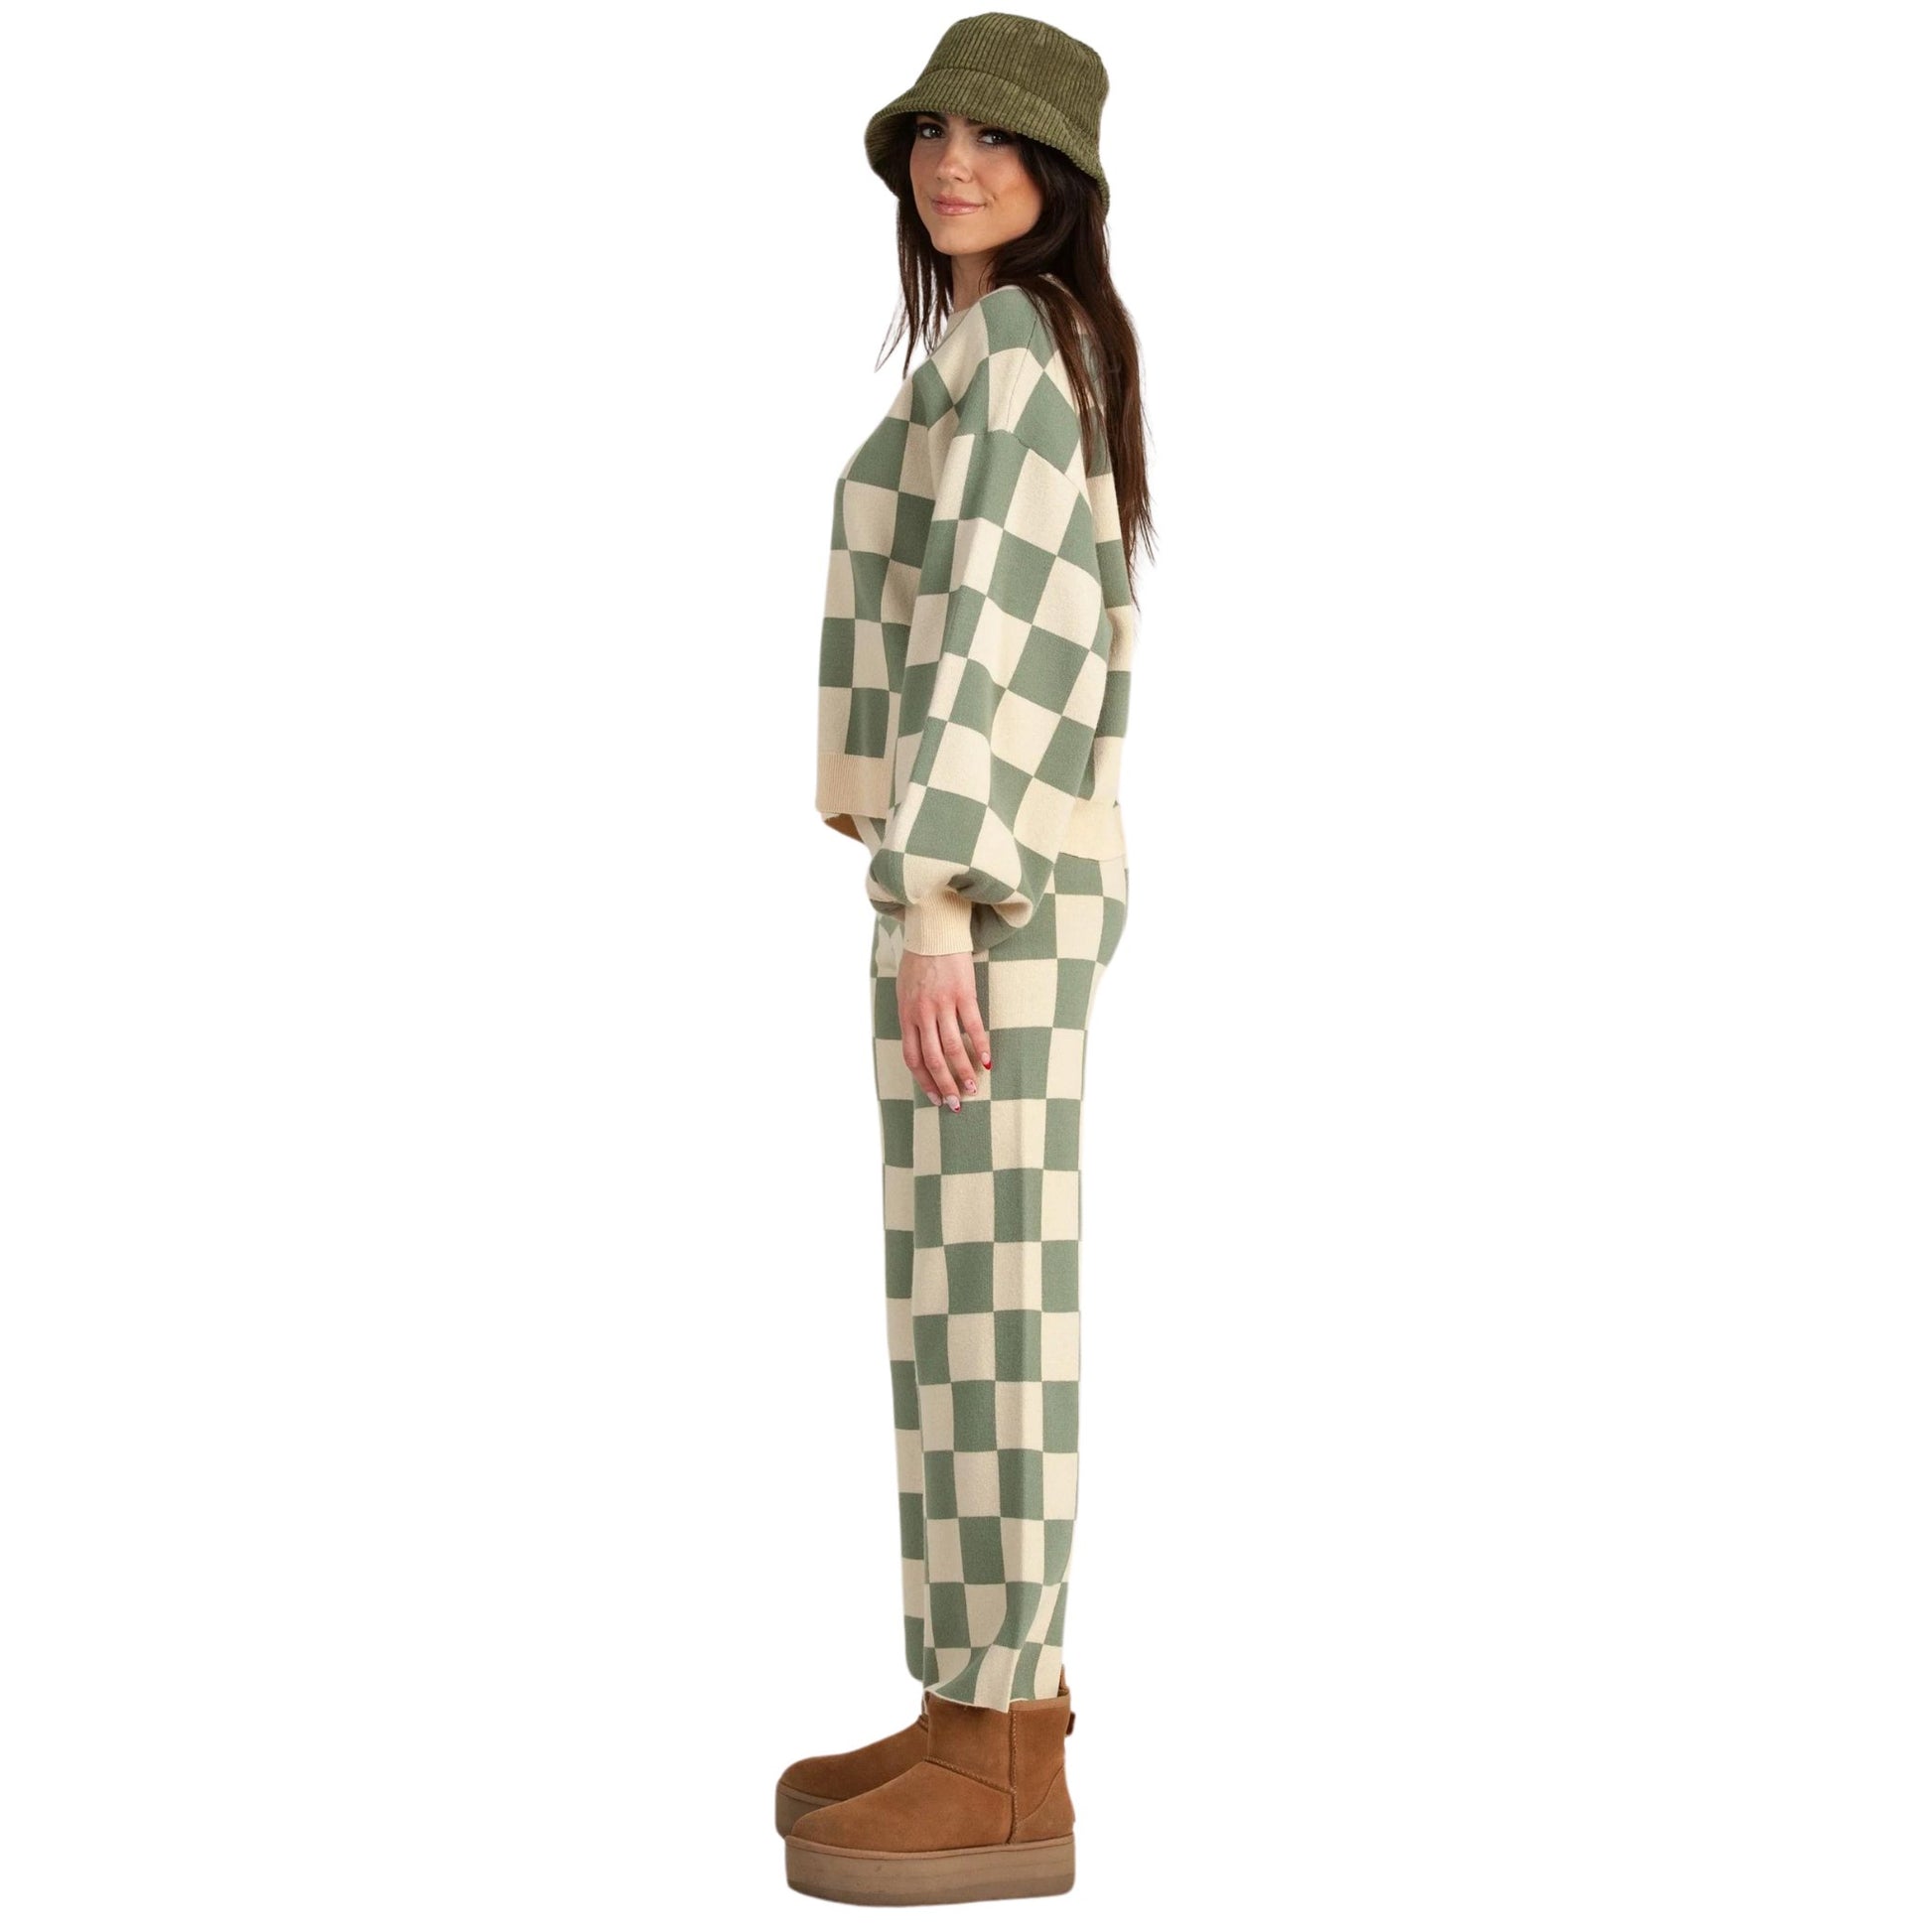 Checkmate Sweater & Pant Set - Something about Sofia